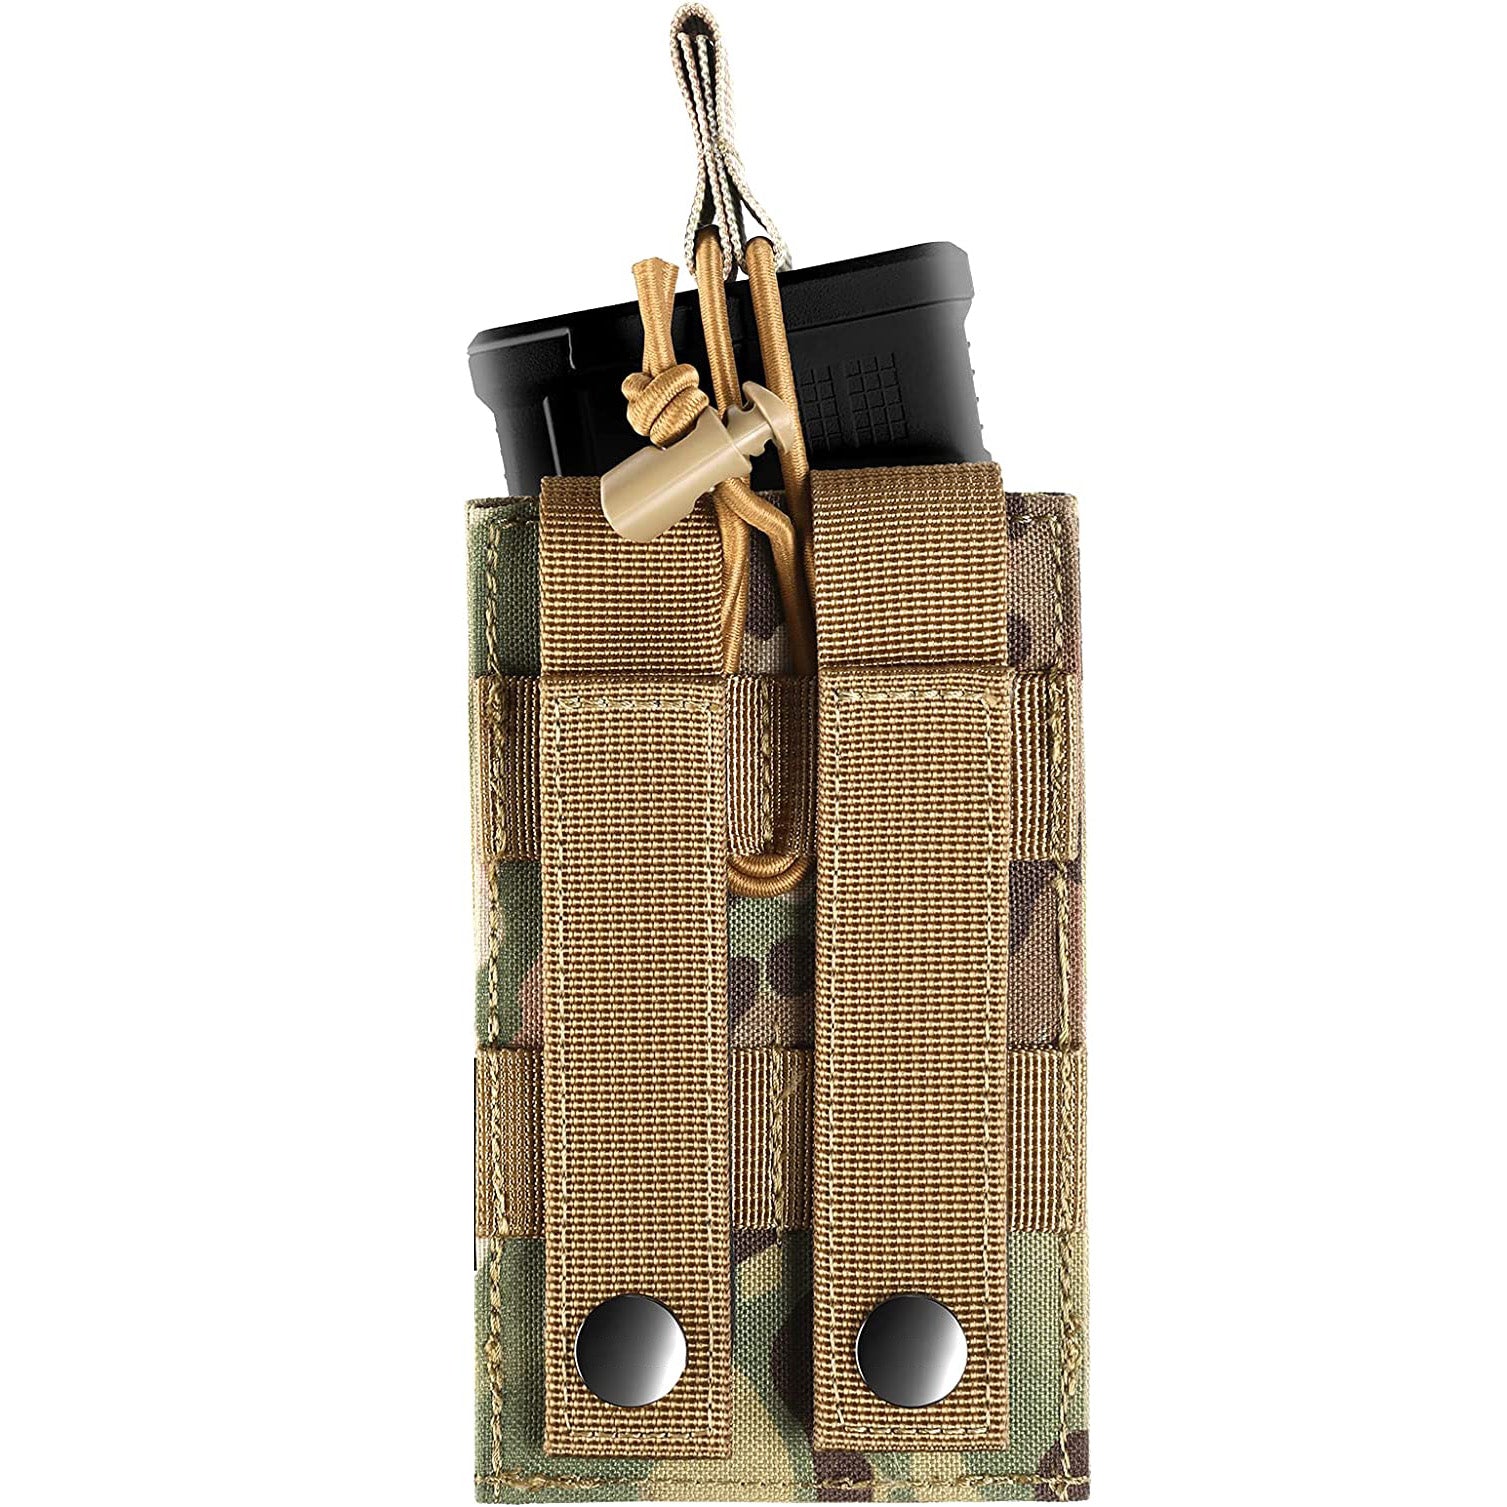 Molle Mag Pouch 5.56mm 9mm Open-Top Magazine Pouch